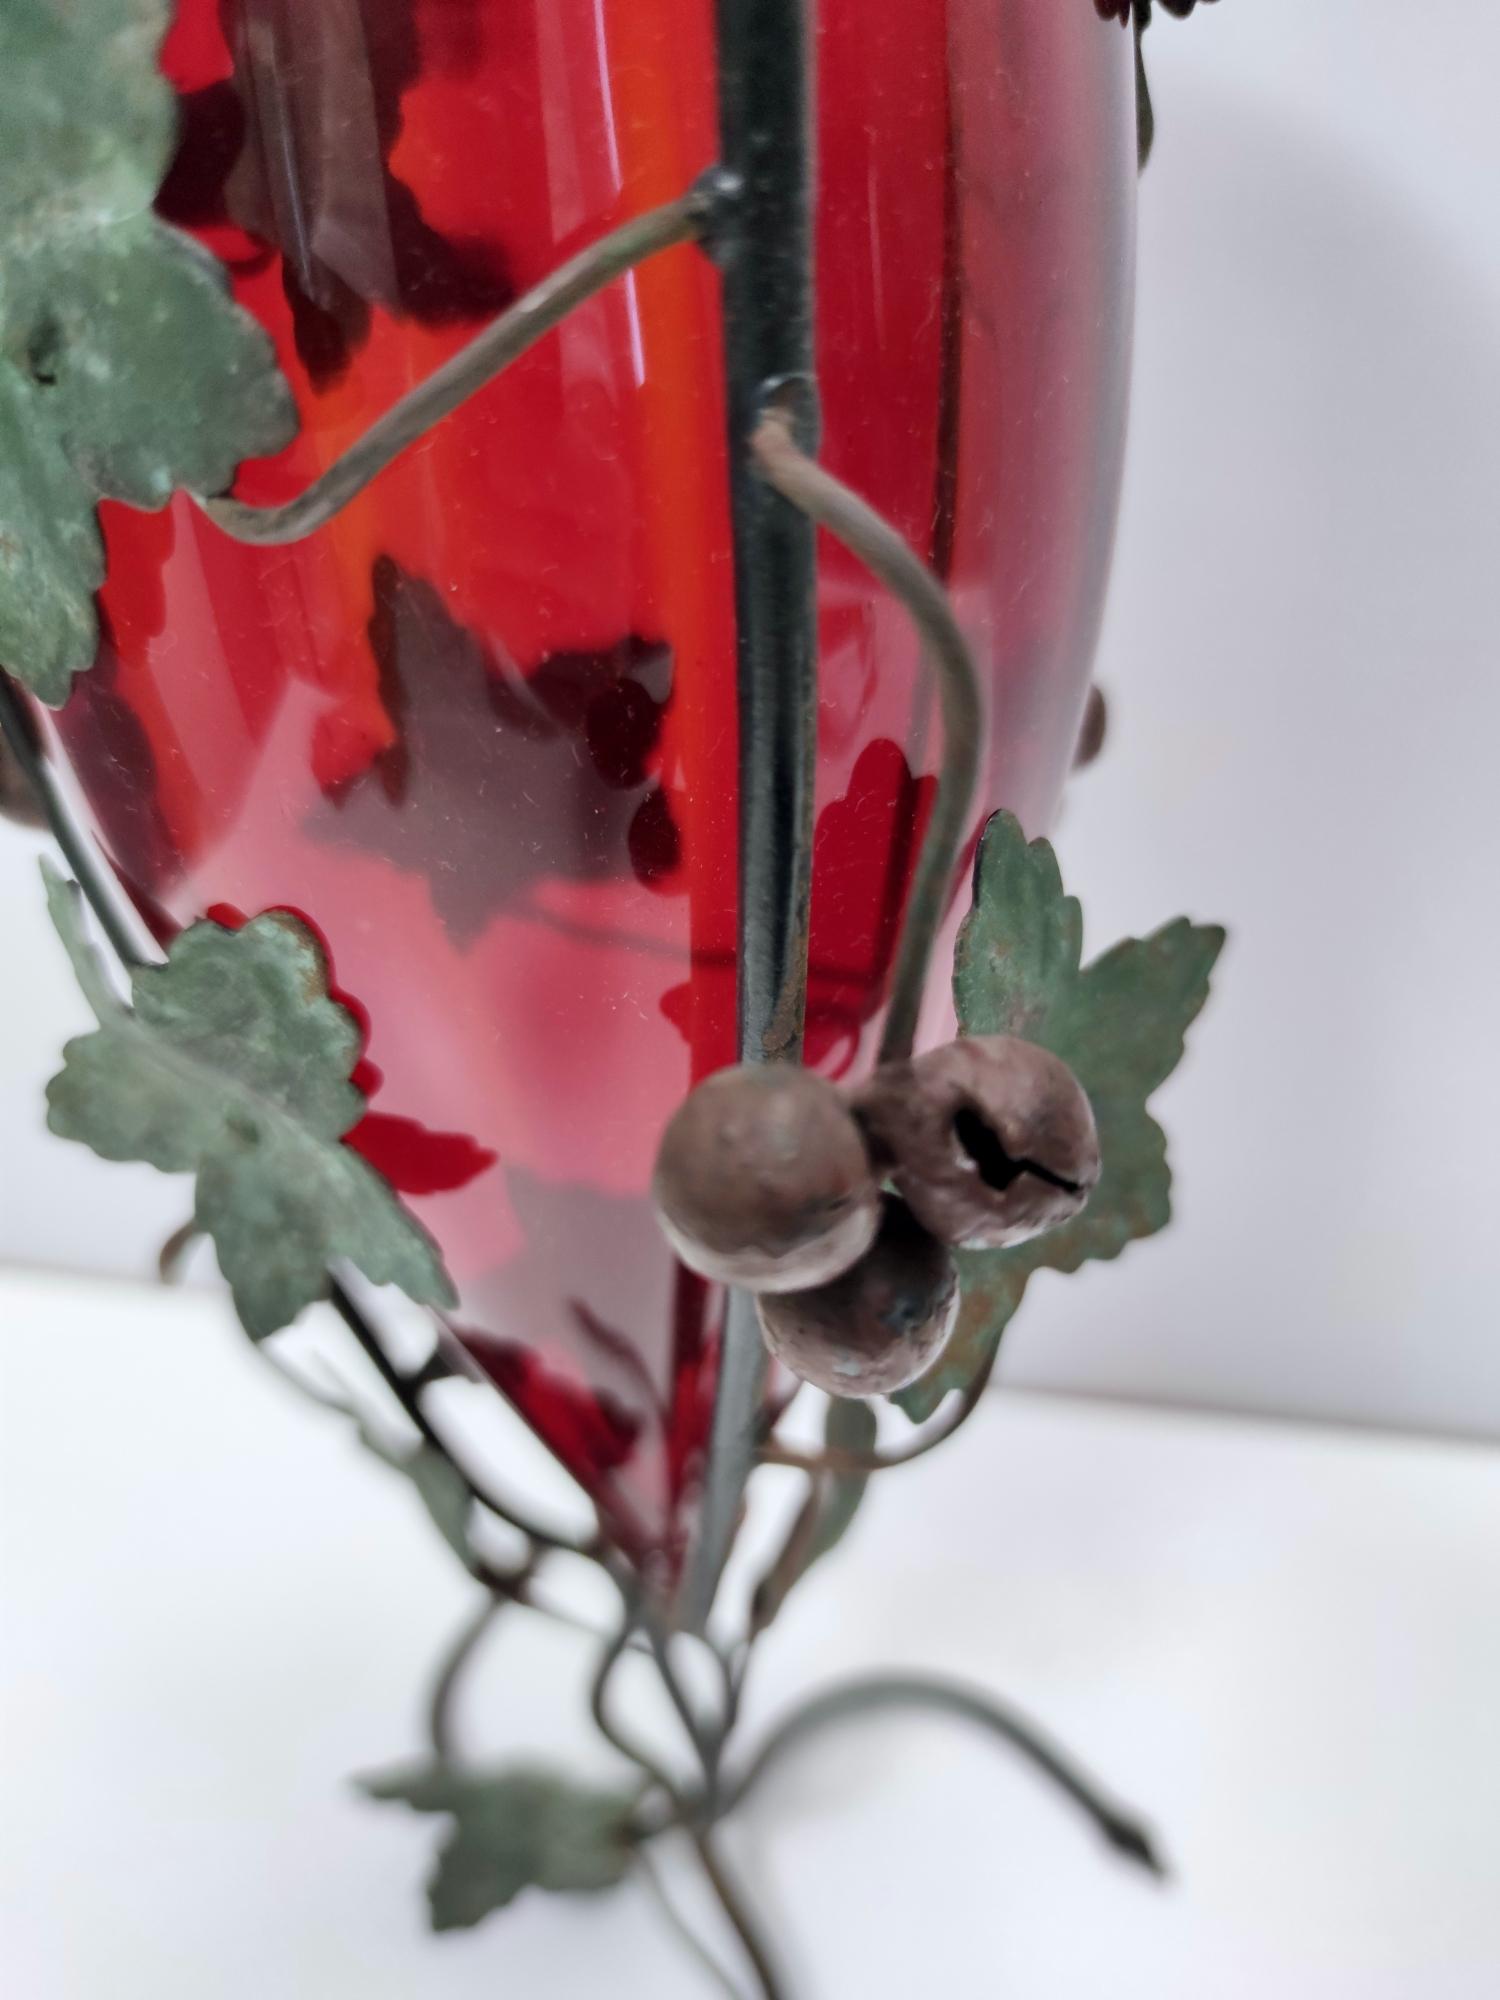 Ruby Red Murano Glass Vase with Iron Grape Vines Ascribable to Umberto Bellotto In Excellent Condition For Sale In Bresso, Lombardy